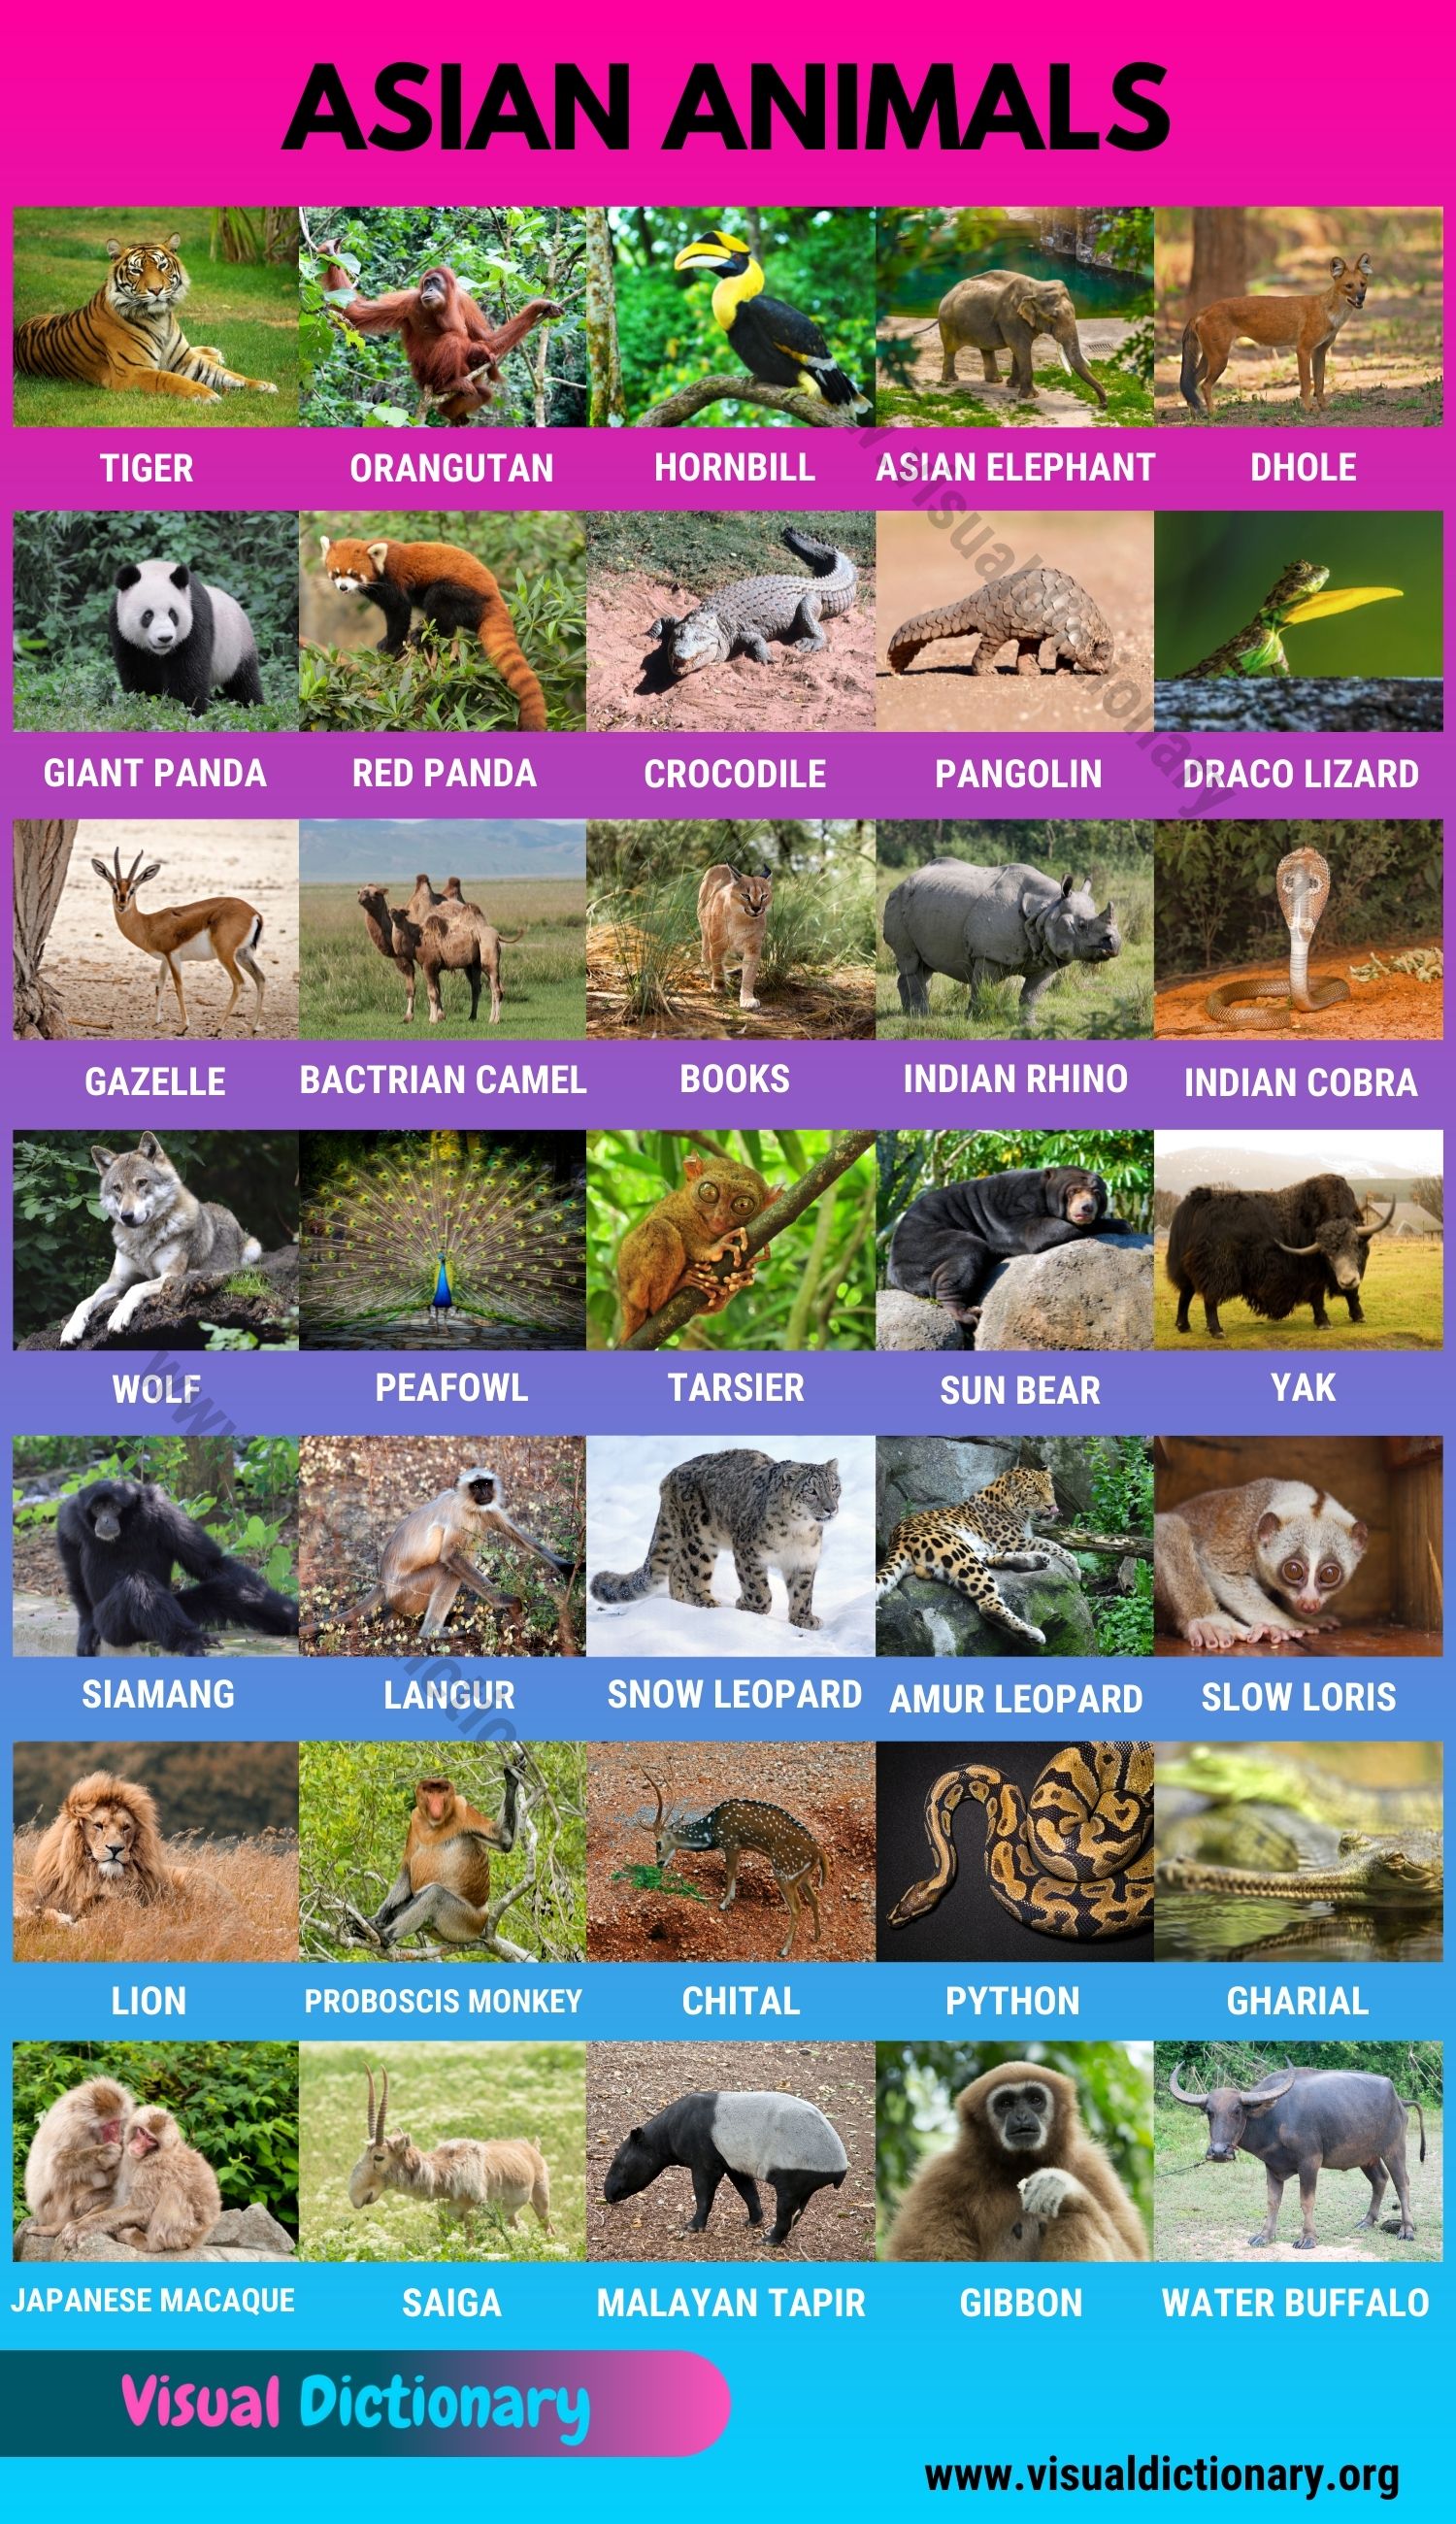 Asian Animals: Useful List of 35 Animals Found in Asia - Visual Dictionary